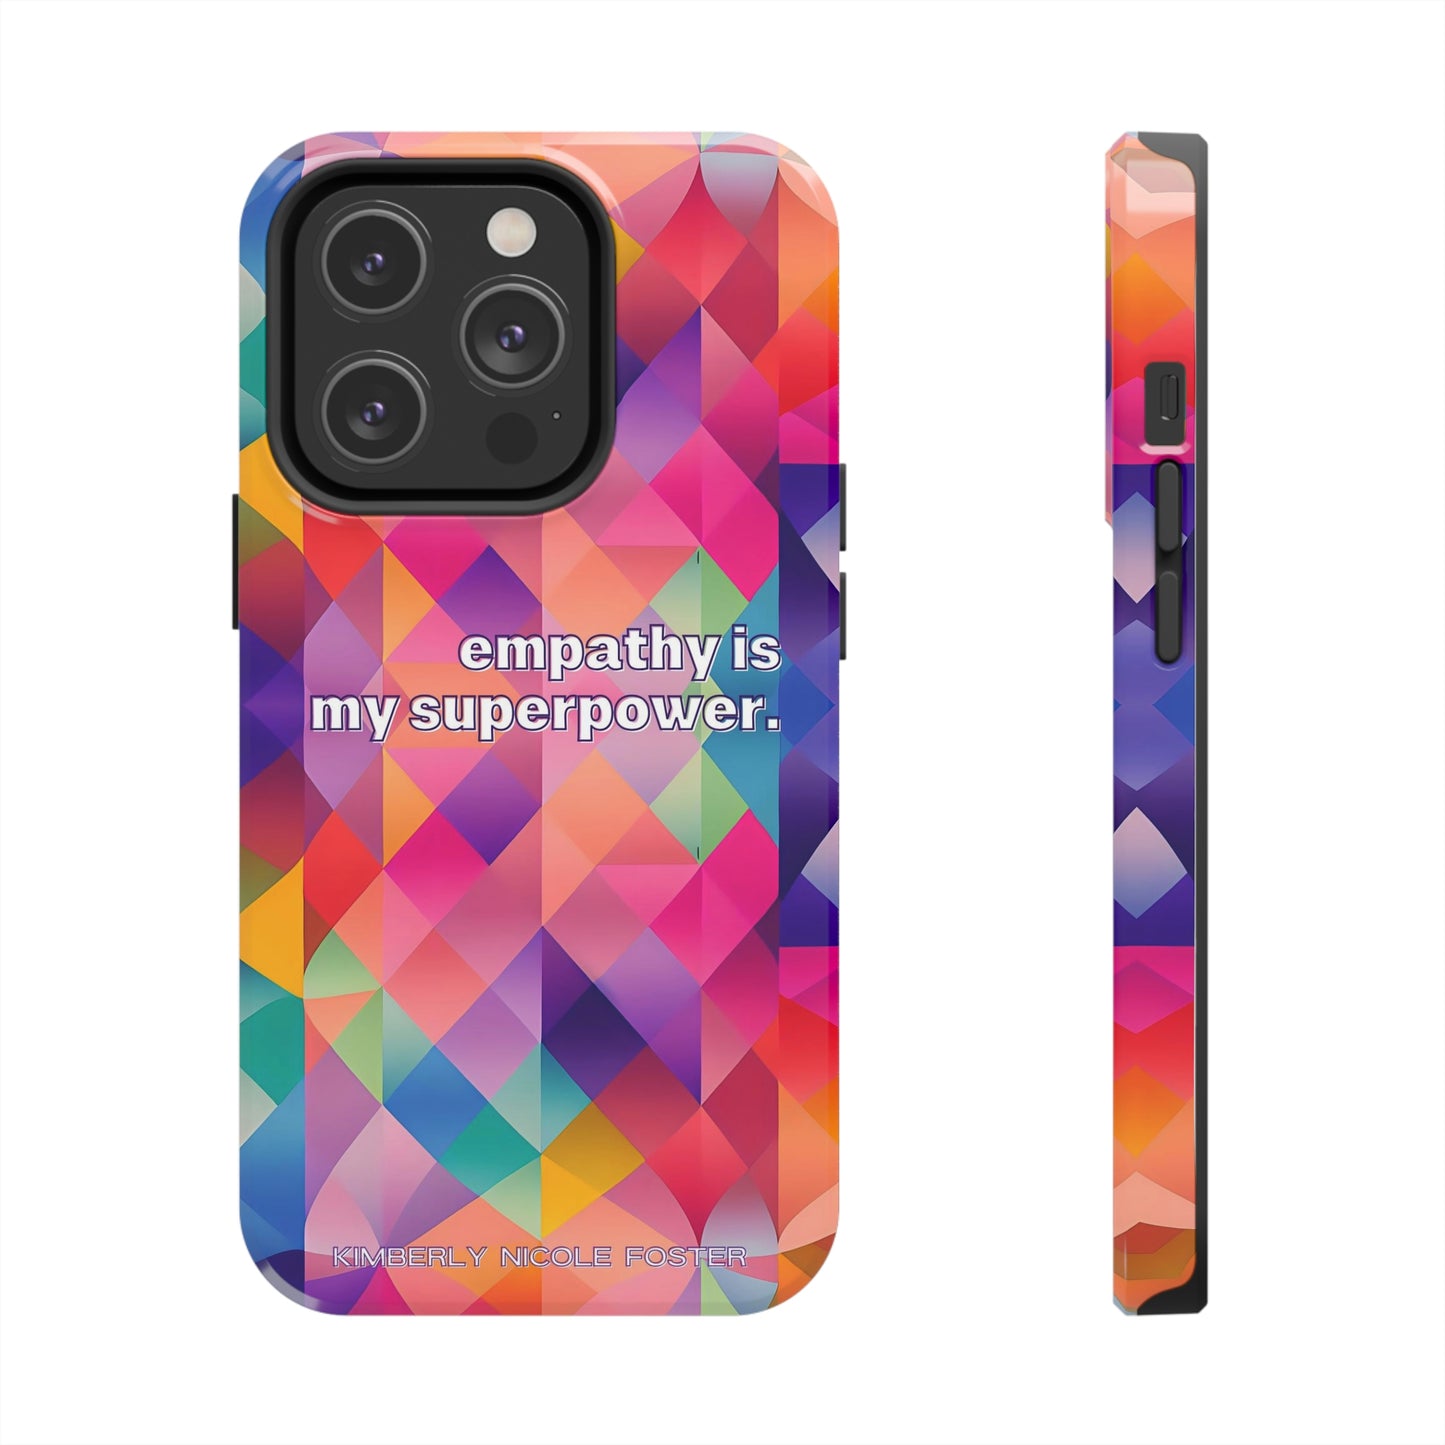 Empathy is my superpower. iPhone case